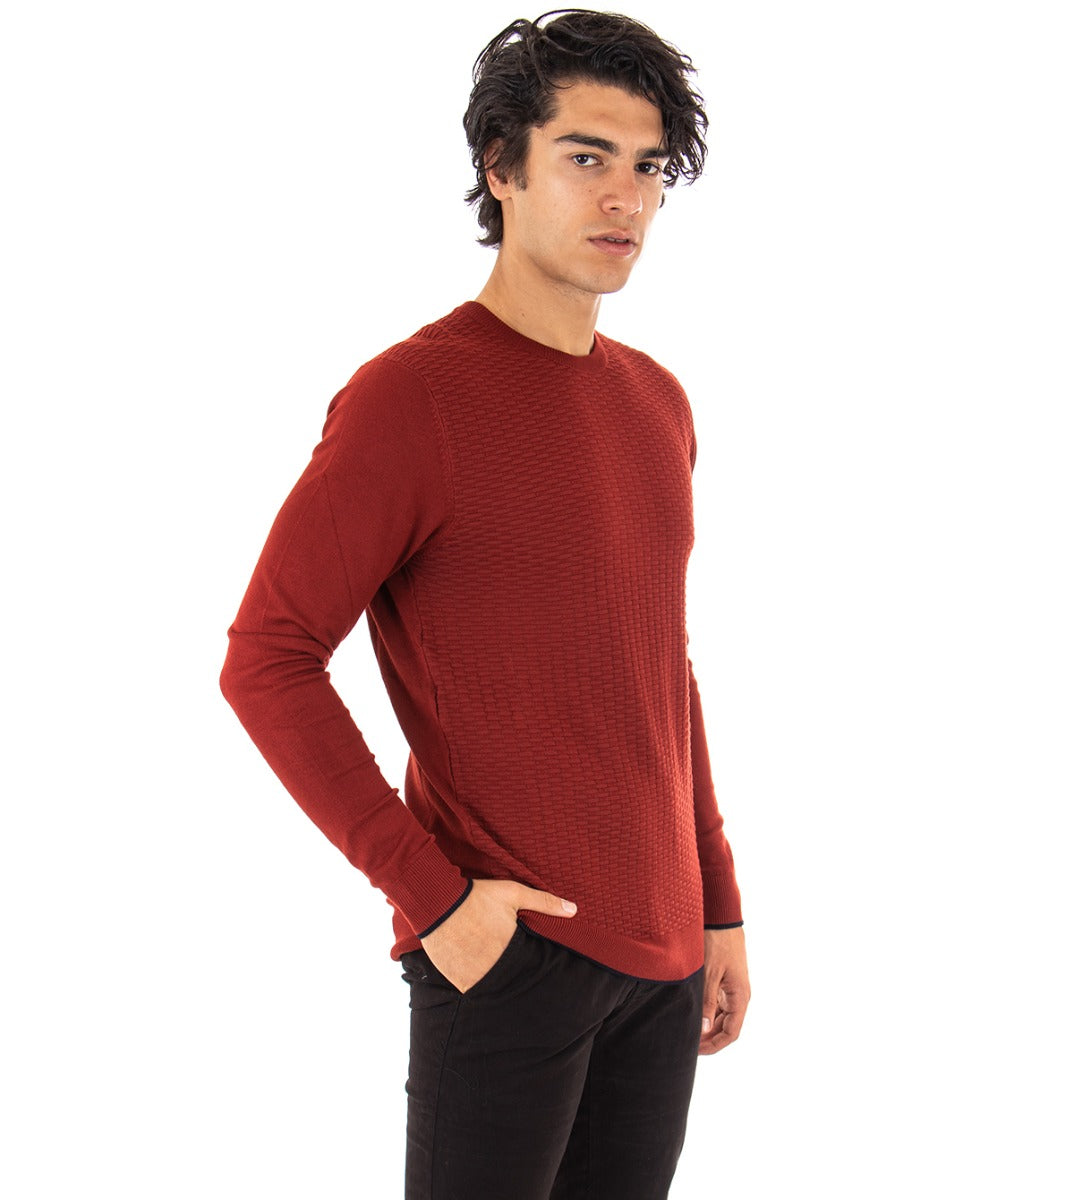 Men's Sweater Long Sleeves Solid Color Brick q Crewneck Casual Pattern GIOSAL